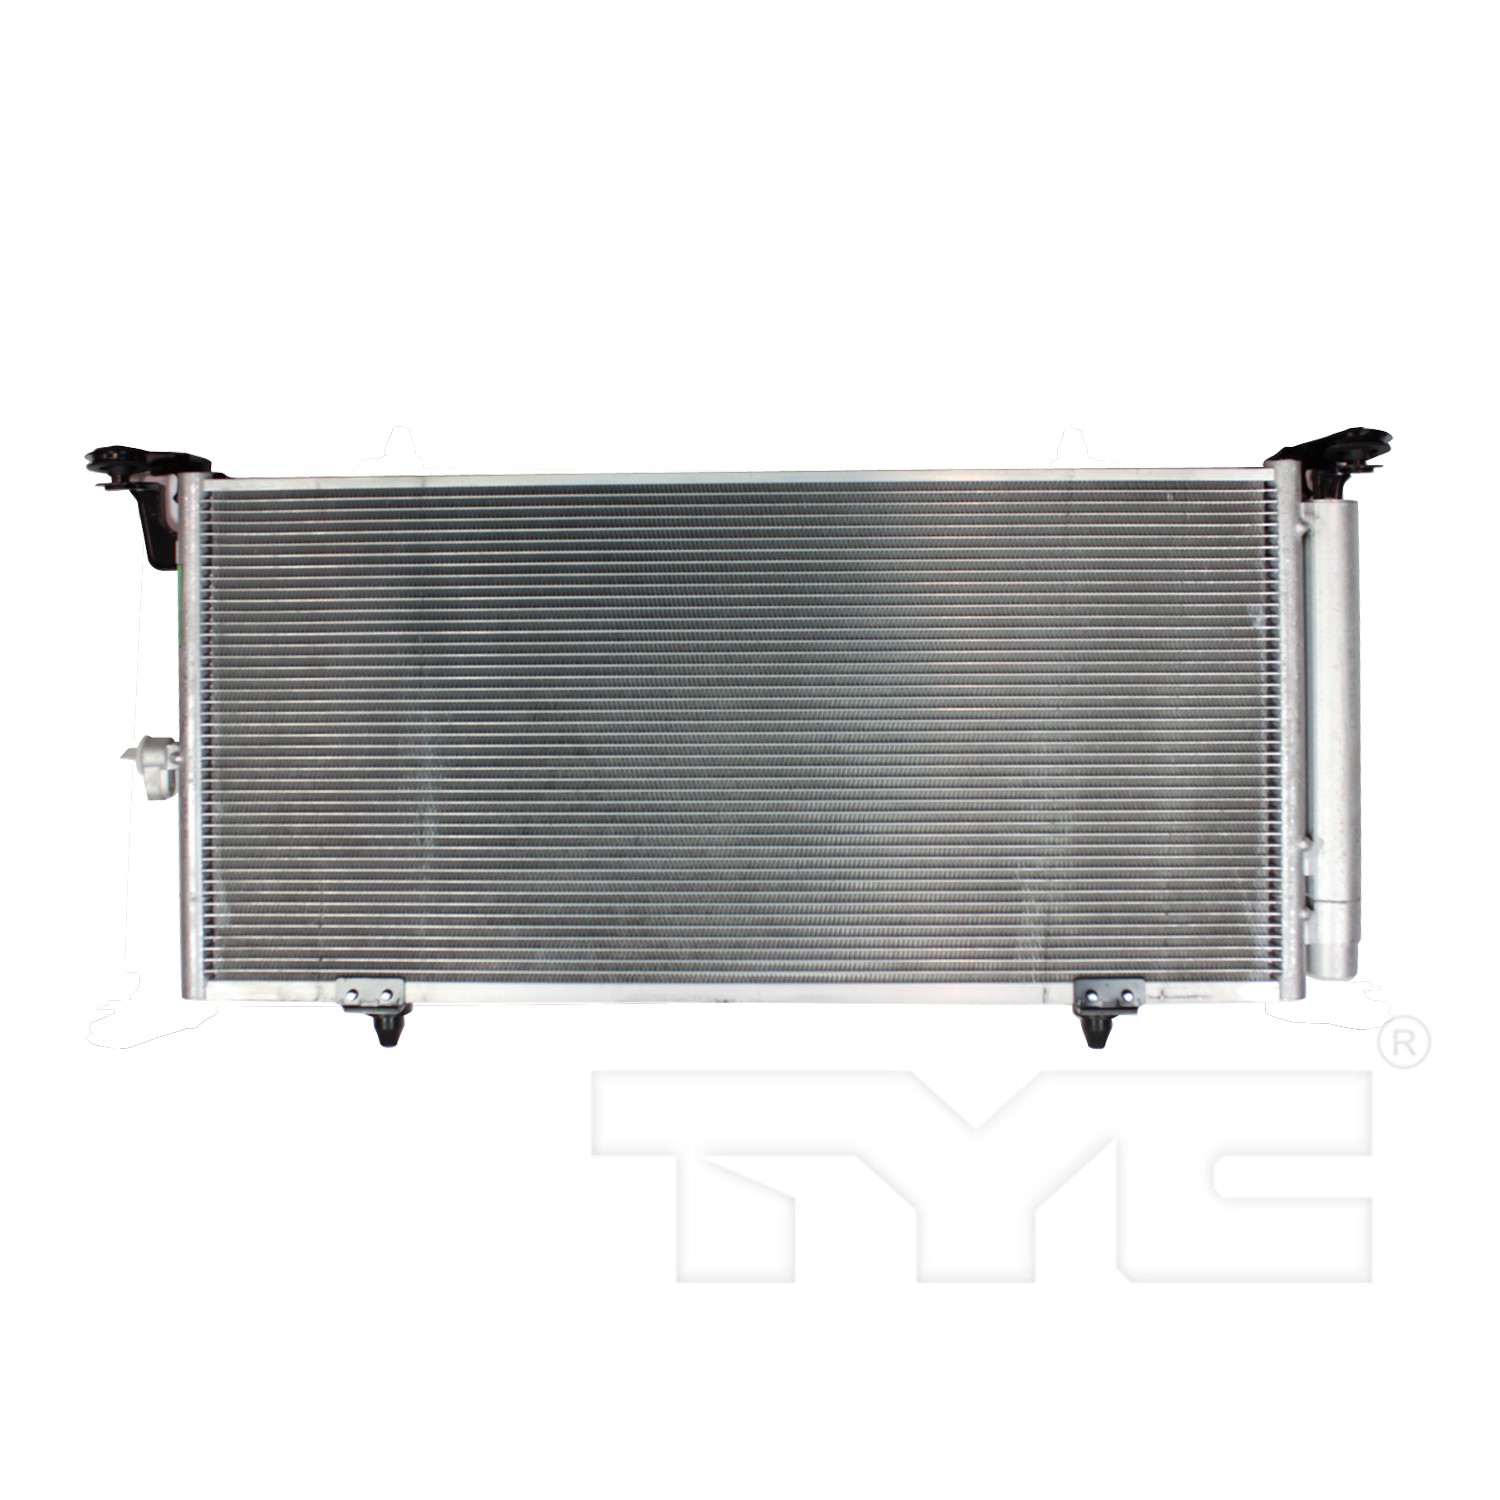 Aftermarket AC CONDENSERS for SUBARU - LEGACY, LEGACY,10-14,Air conditioning condenser